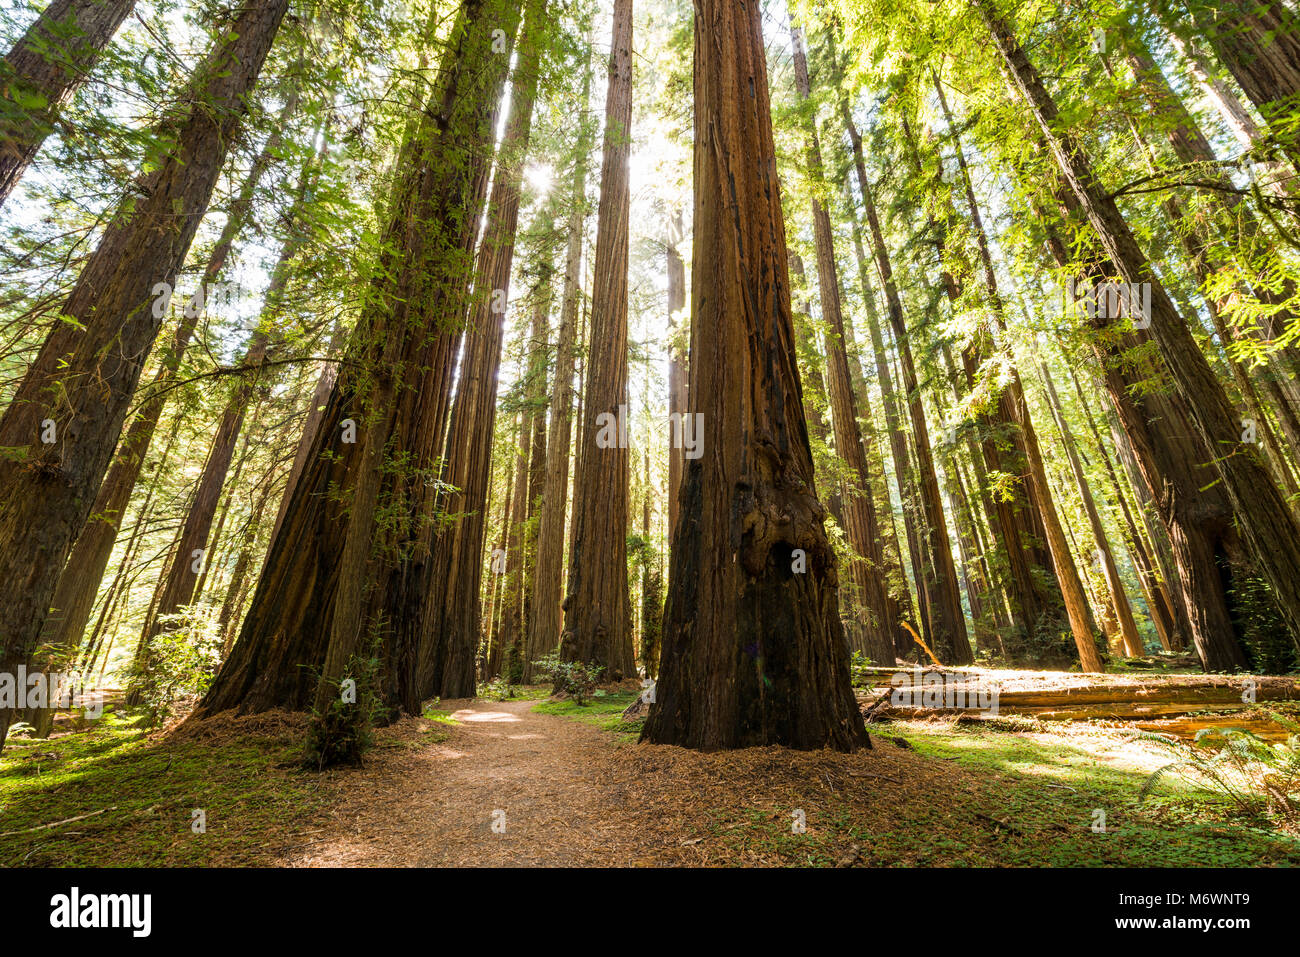 Giant redwood trees in Humboldt Redwoods State and National Park along the Rockefeller Loop in Avenue of the Giants, California. Stock Photo